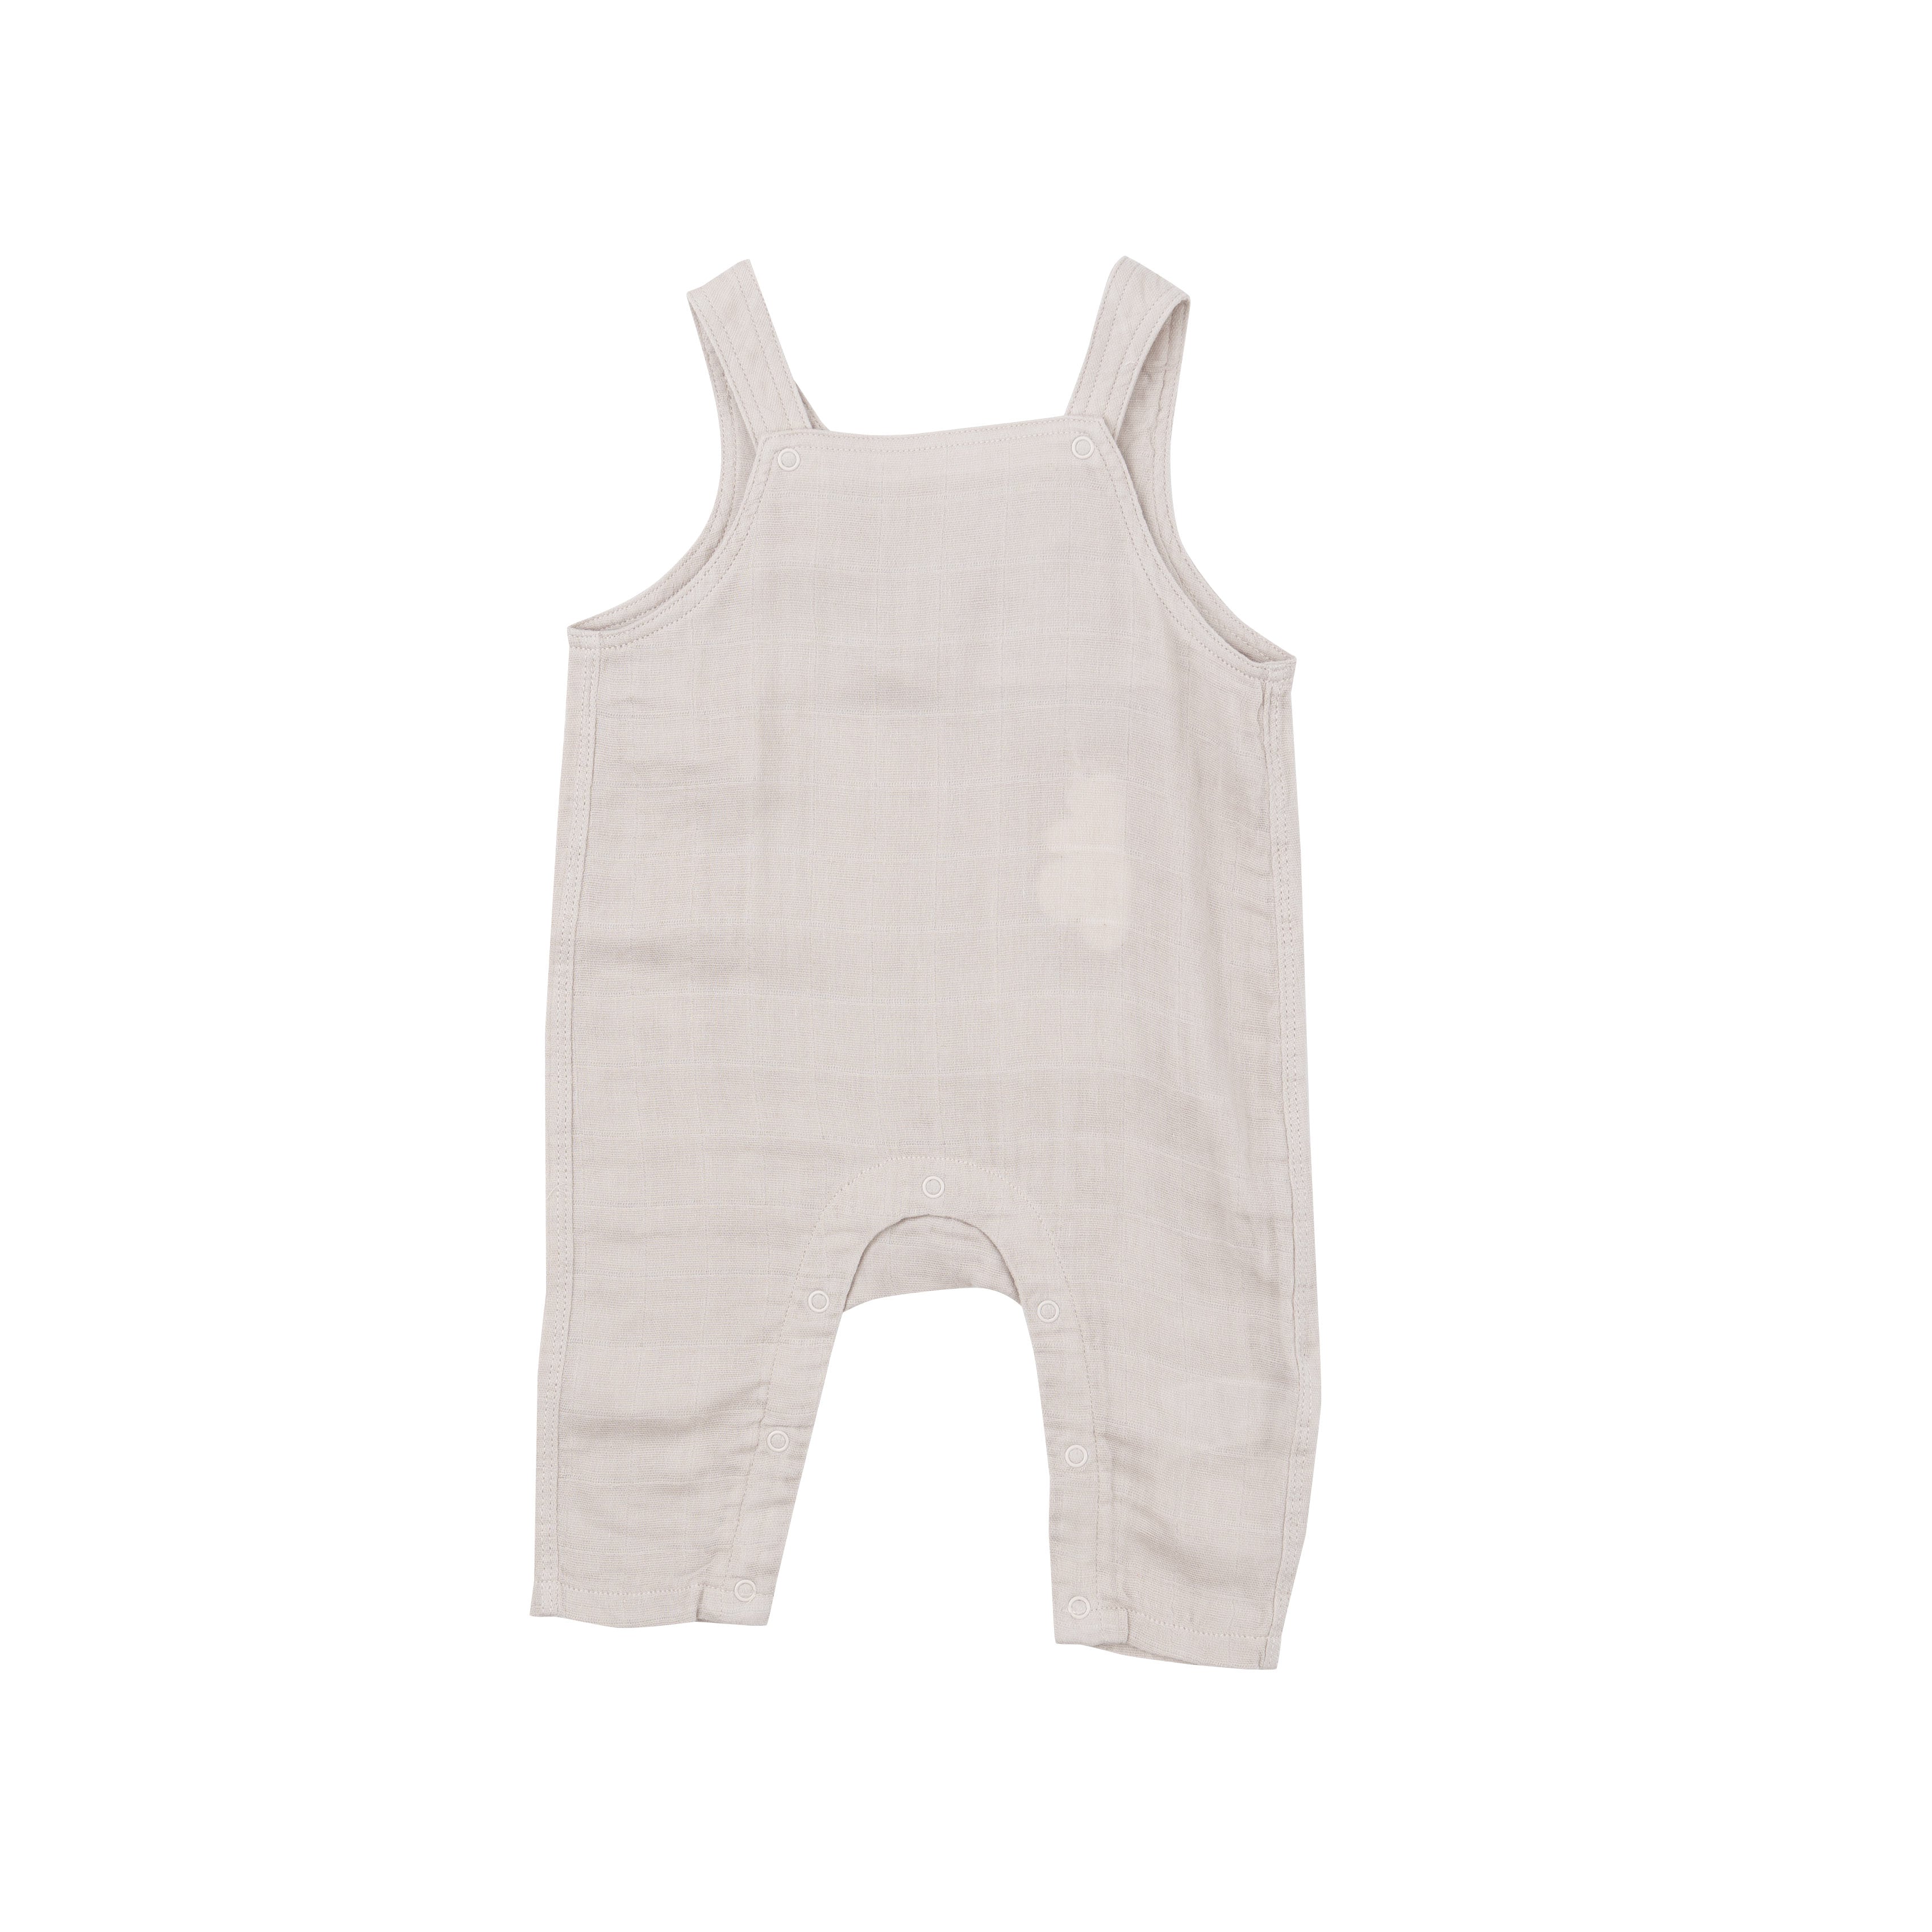 Overalls - Oatmeal Solid Muslin